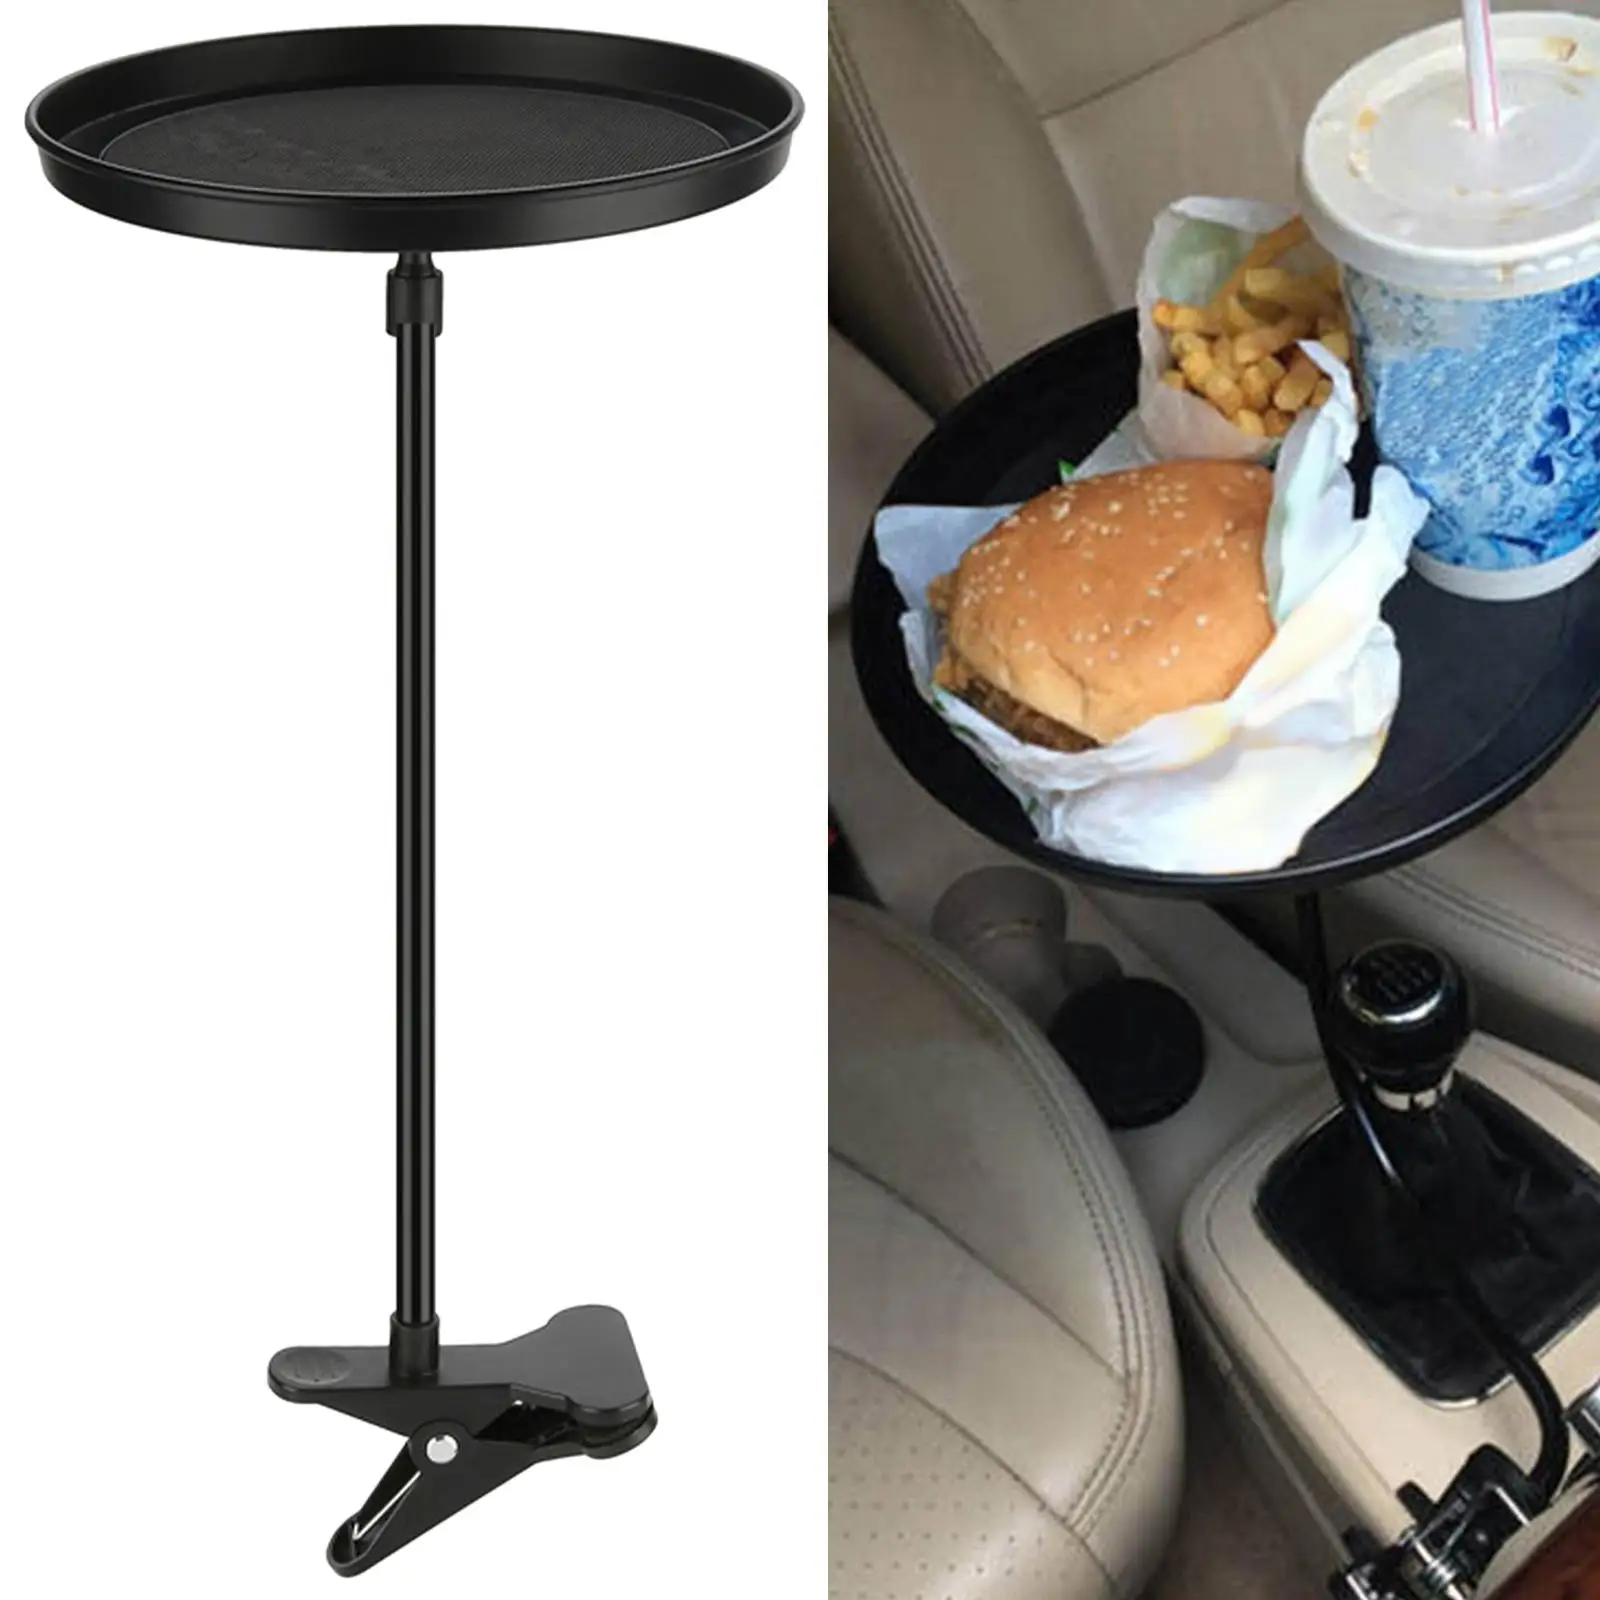 1x Car Food Tray Organizer Non-Slip Universal Stand W/ Clamp for Table